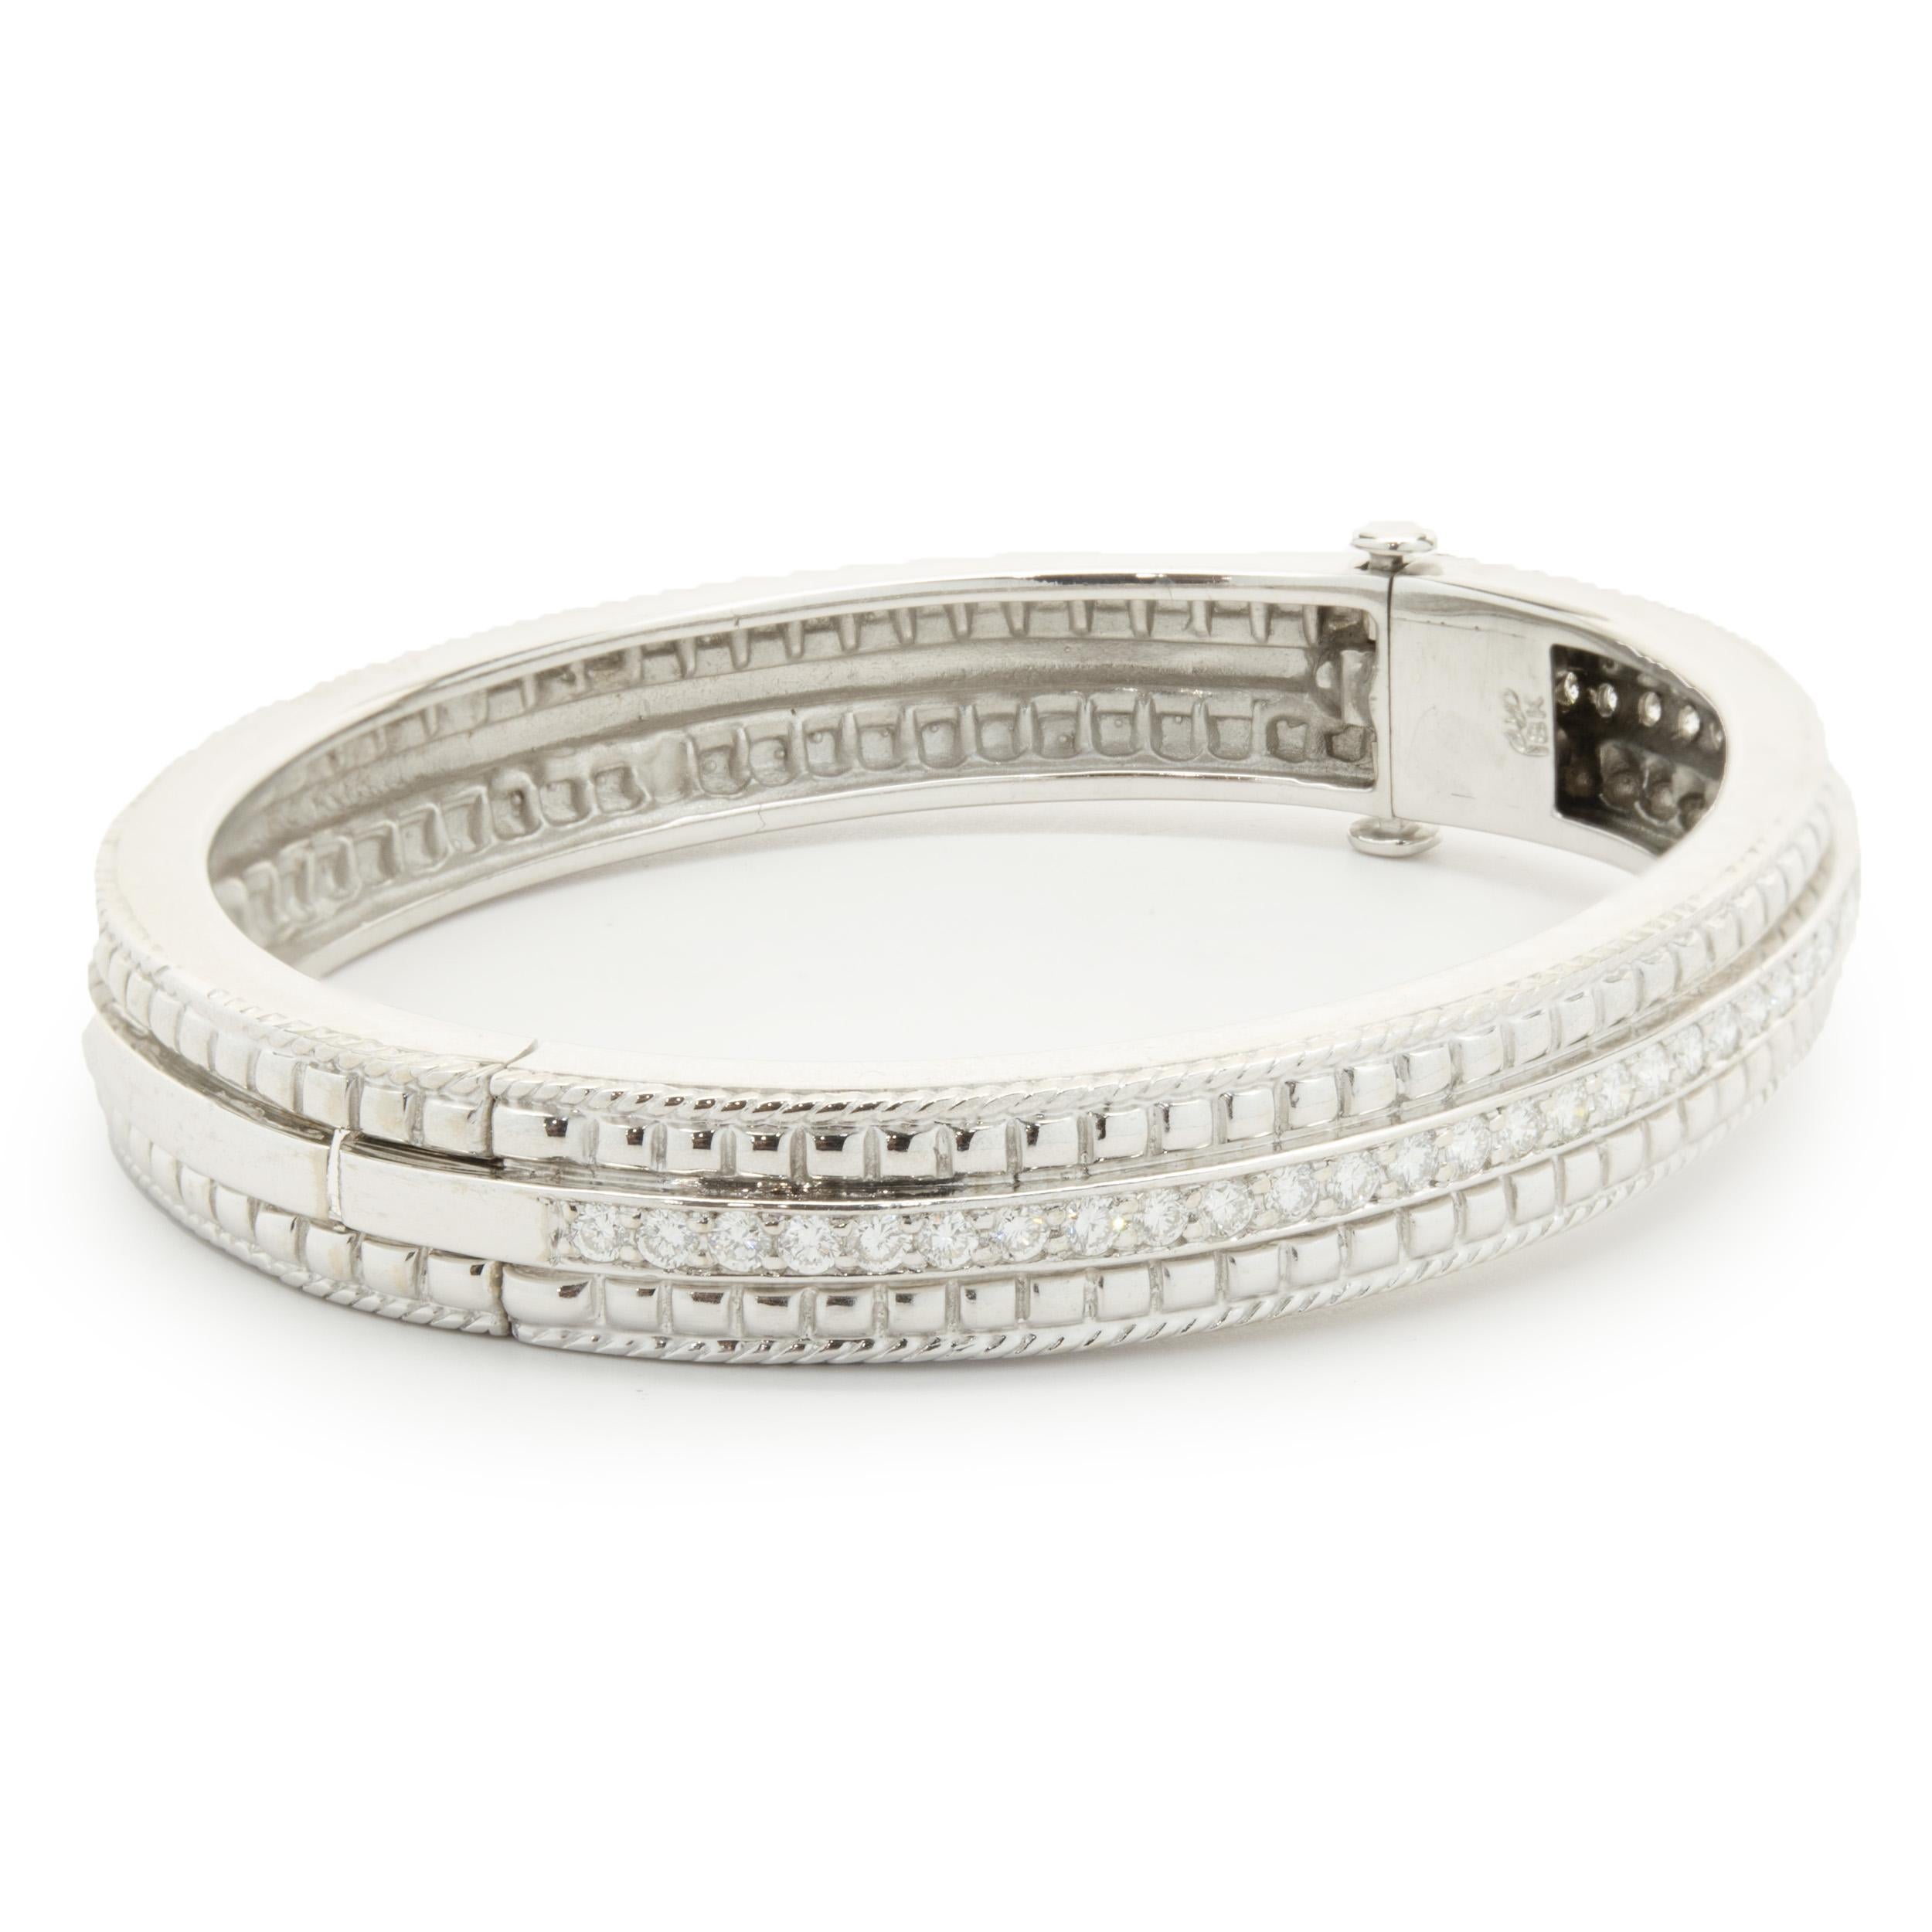 Designer: custom design
Material: 18K white gold
Diamonds: 40 round brilliant cut = 1.20cttw
Color: G
Clarity: VS2
Dimensions: bracelet will fit up to a 7 -inch wrist
Weight: 34.80 grams